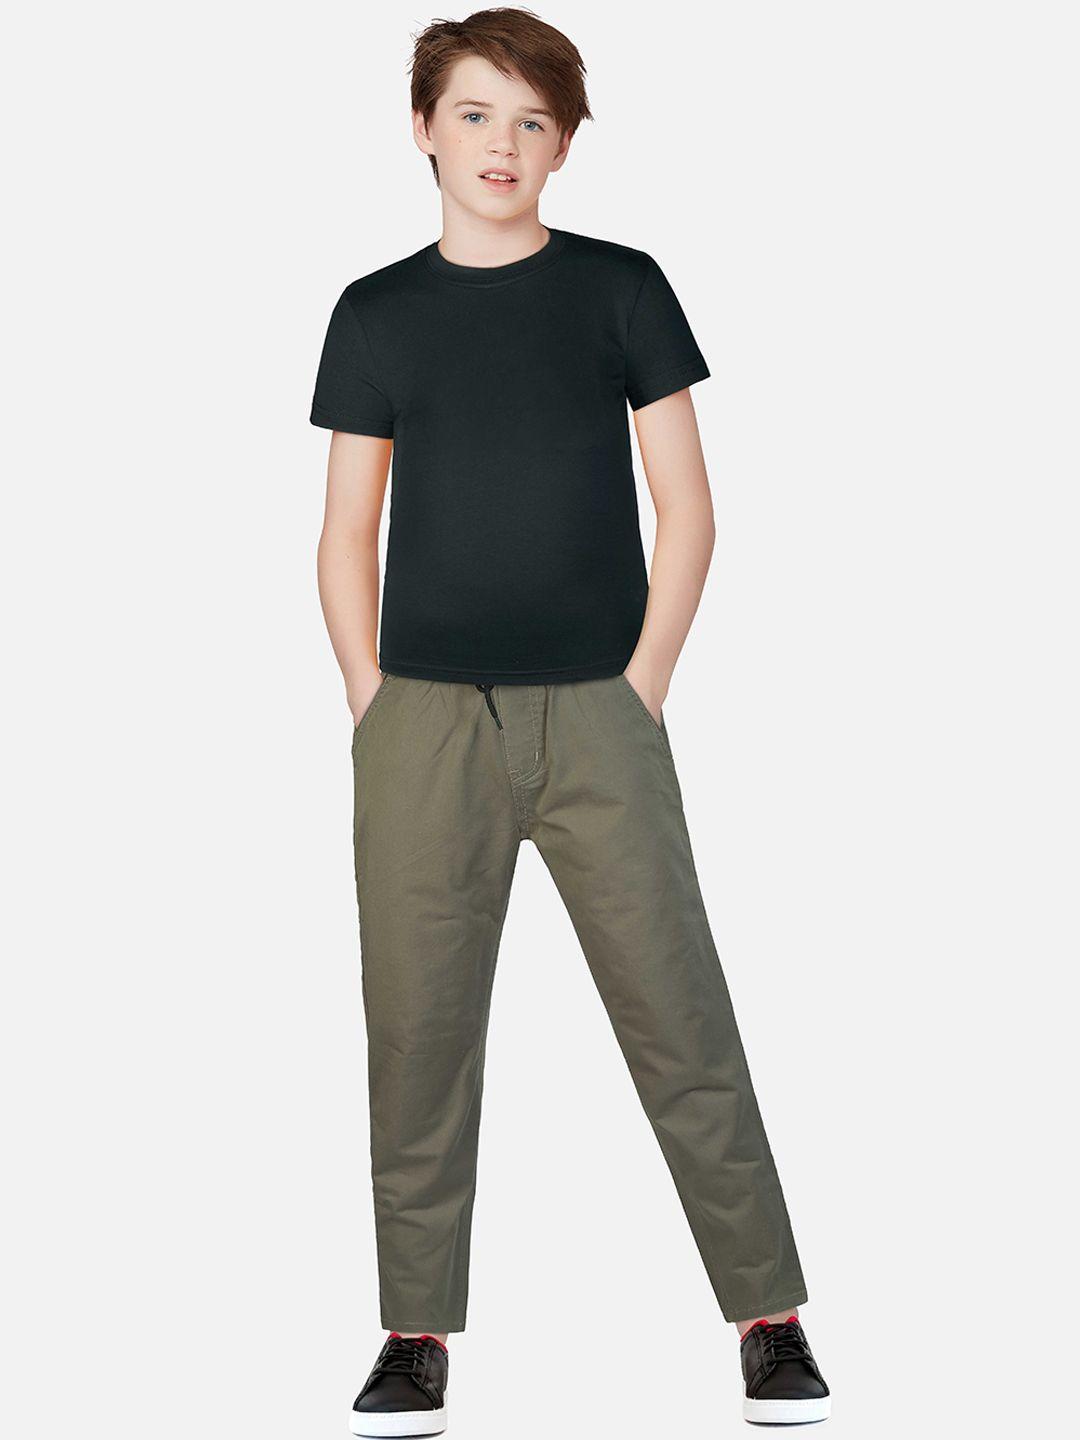 palm-tree-boys-mid-rise-regular-fit-cotton-chinos-trouser